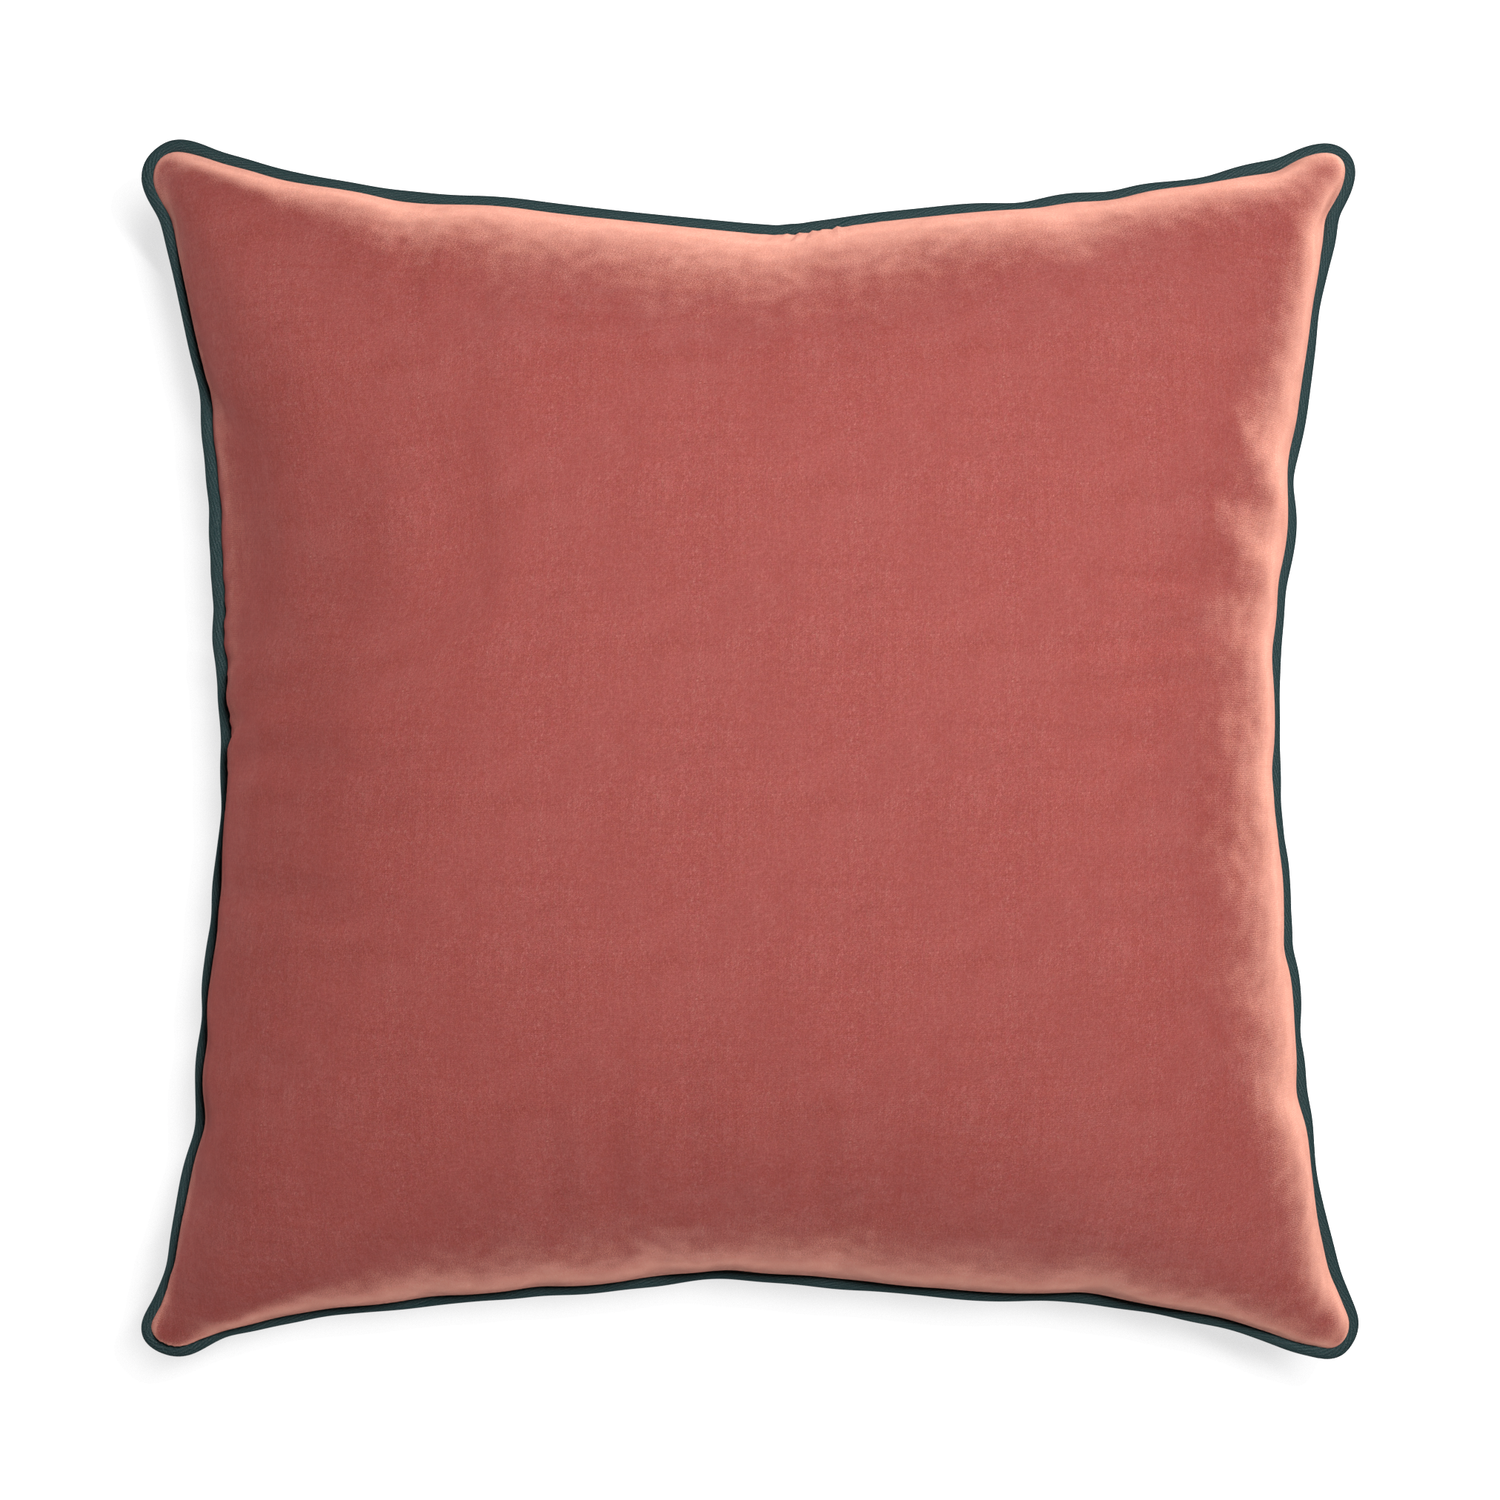 Euro-sham cosmo velvet custom coralpillow with p piping on white background